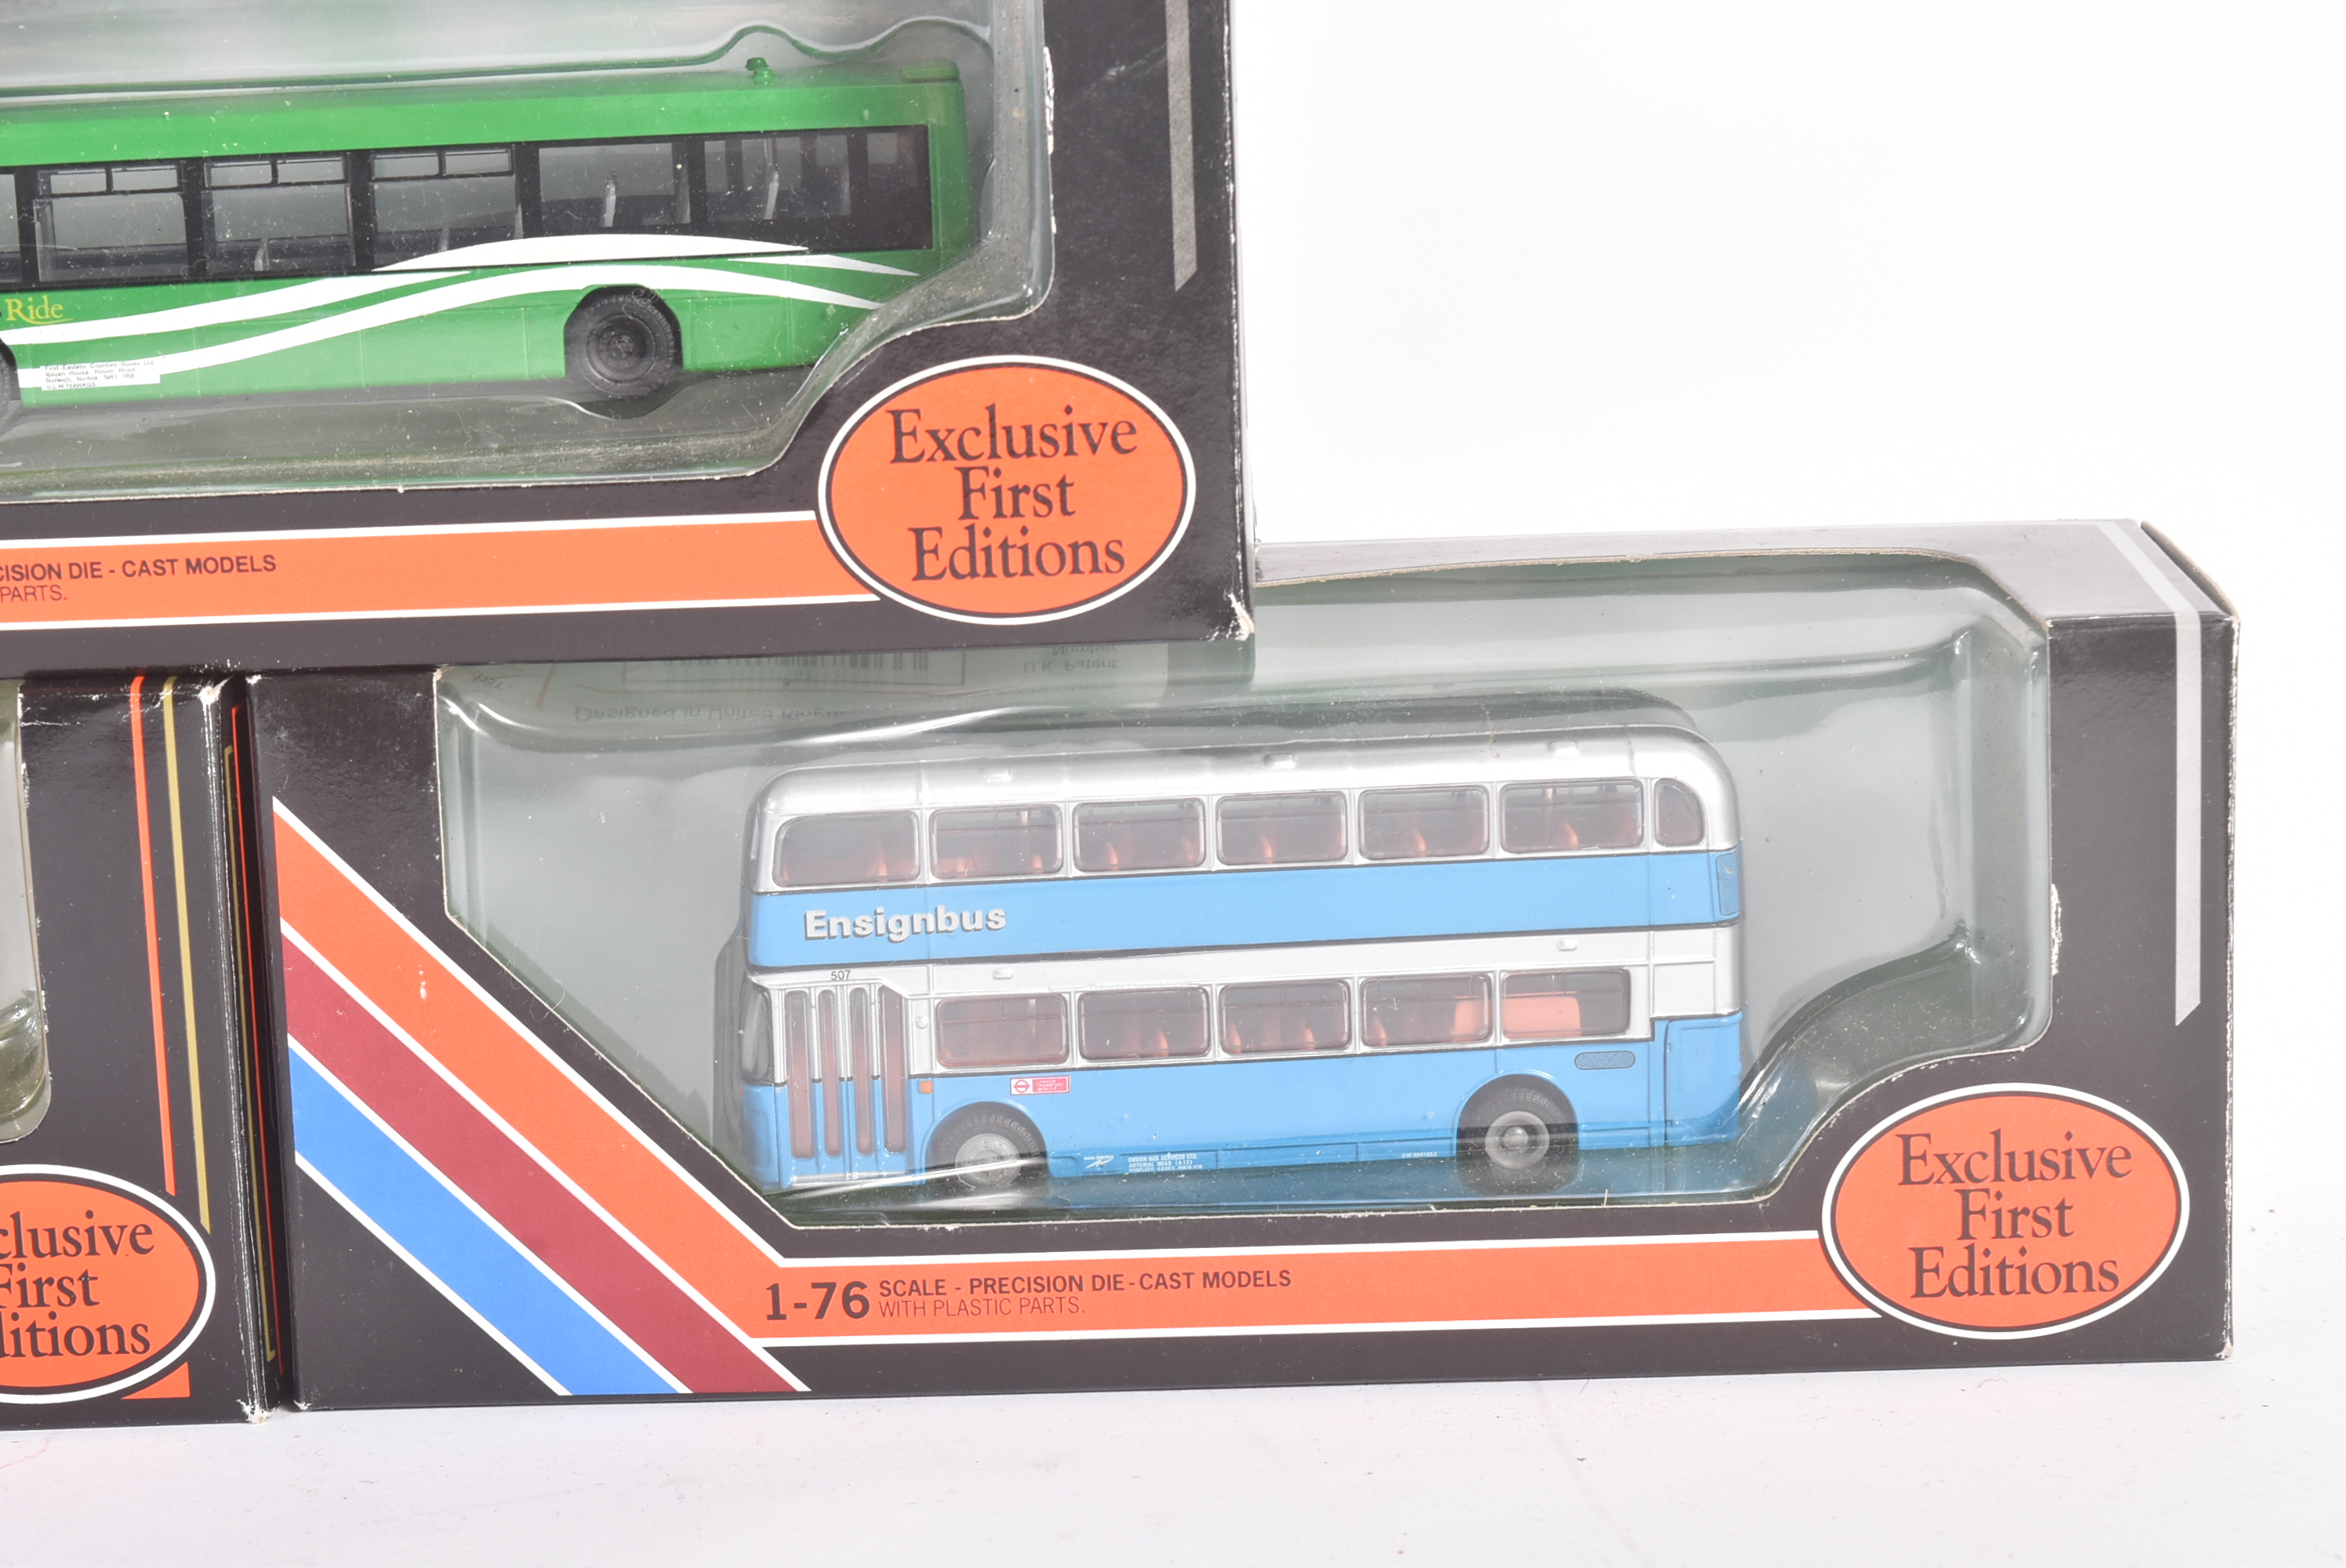 COLLECTION OF EXCLUSIVE FIRST EDITIONS DIECAST MODEL BUSES - Image 2 of 5